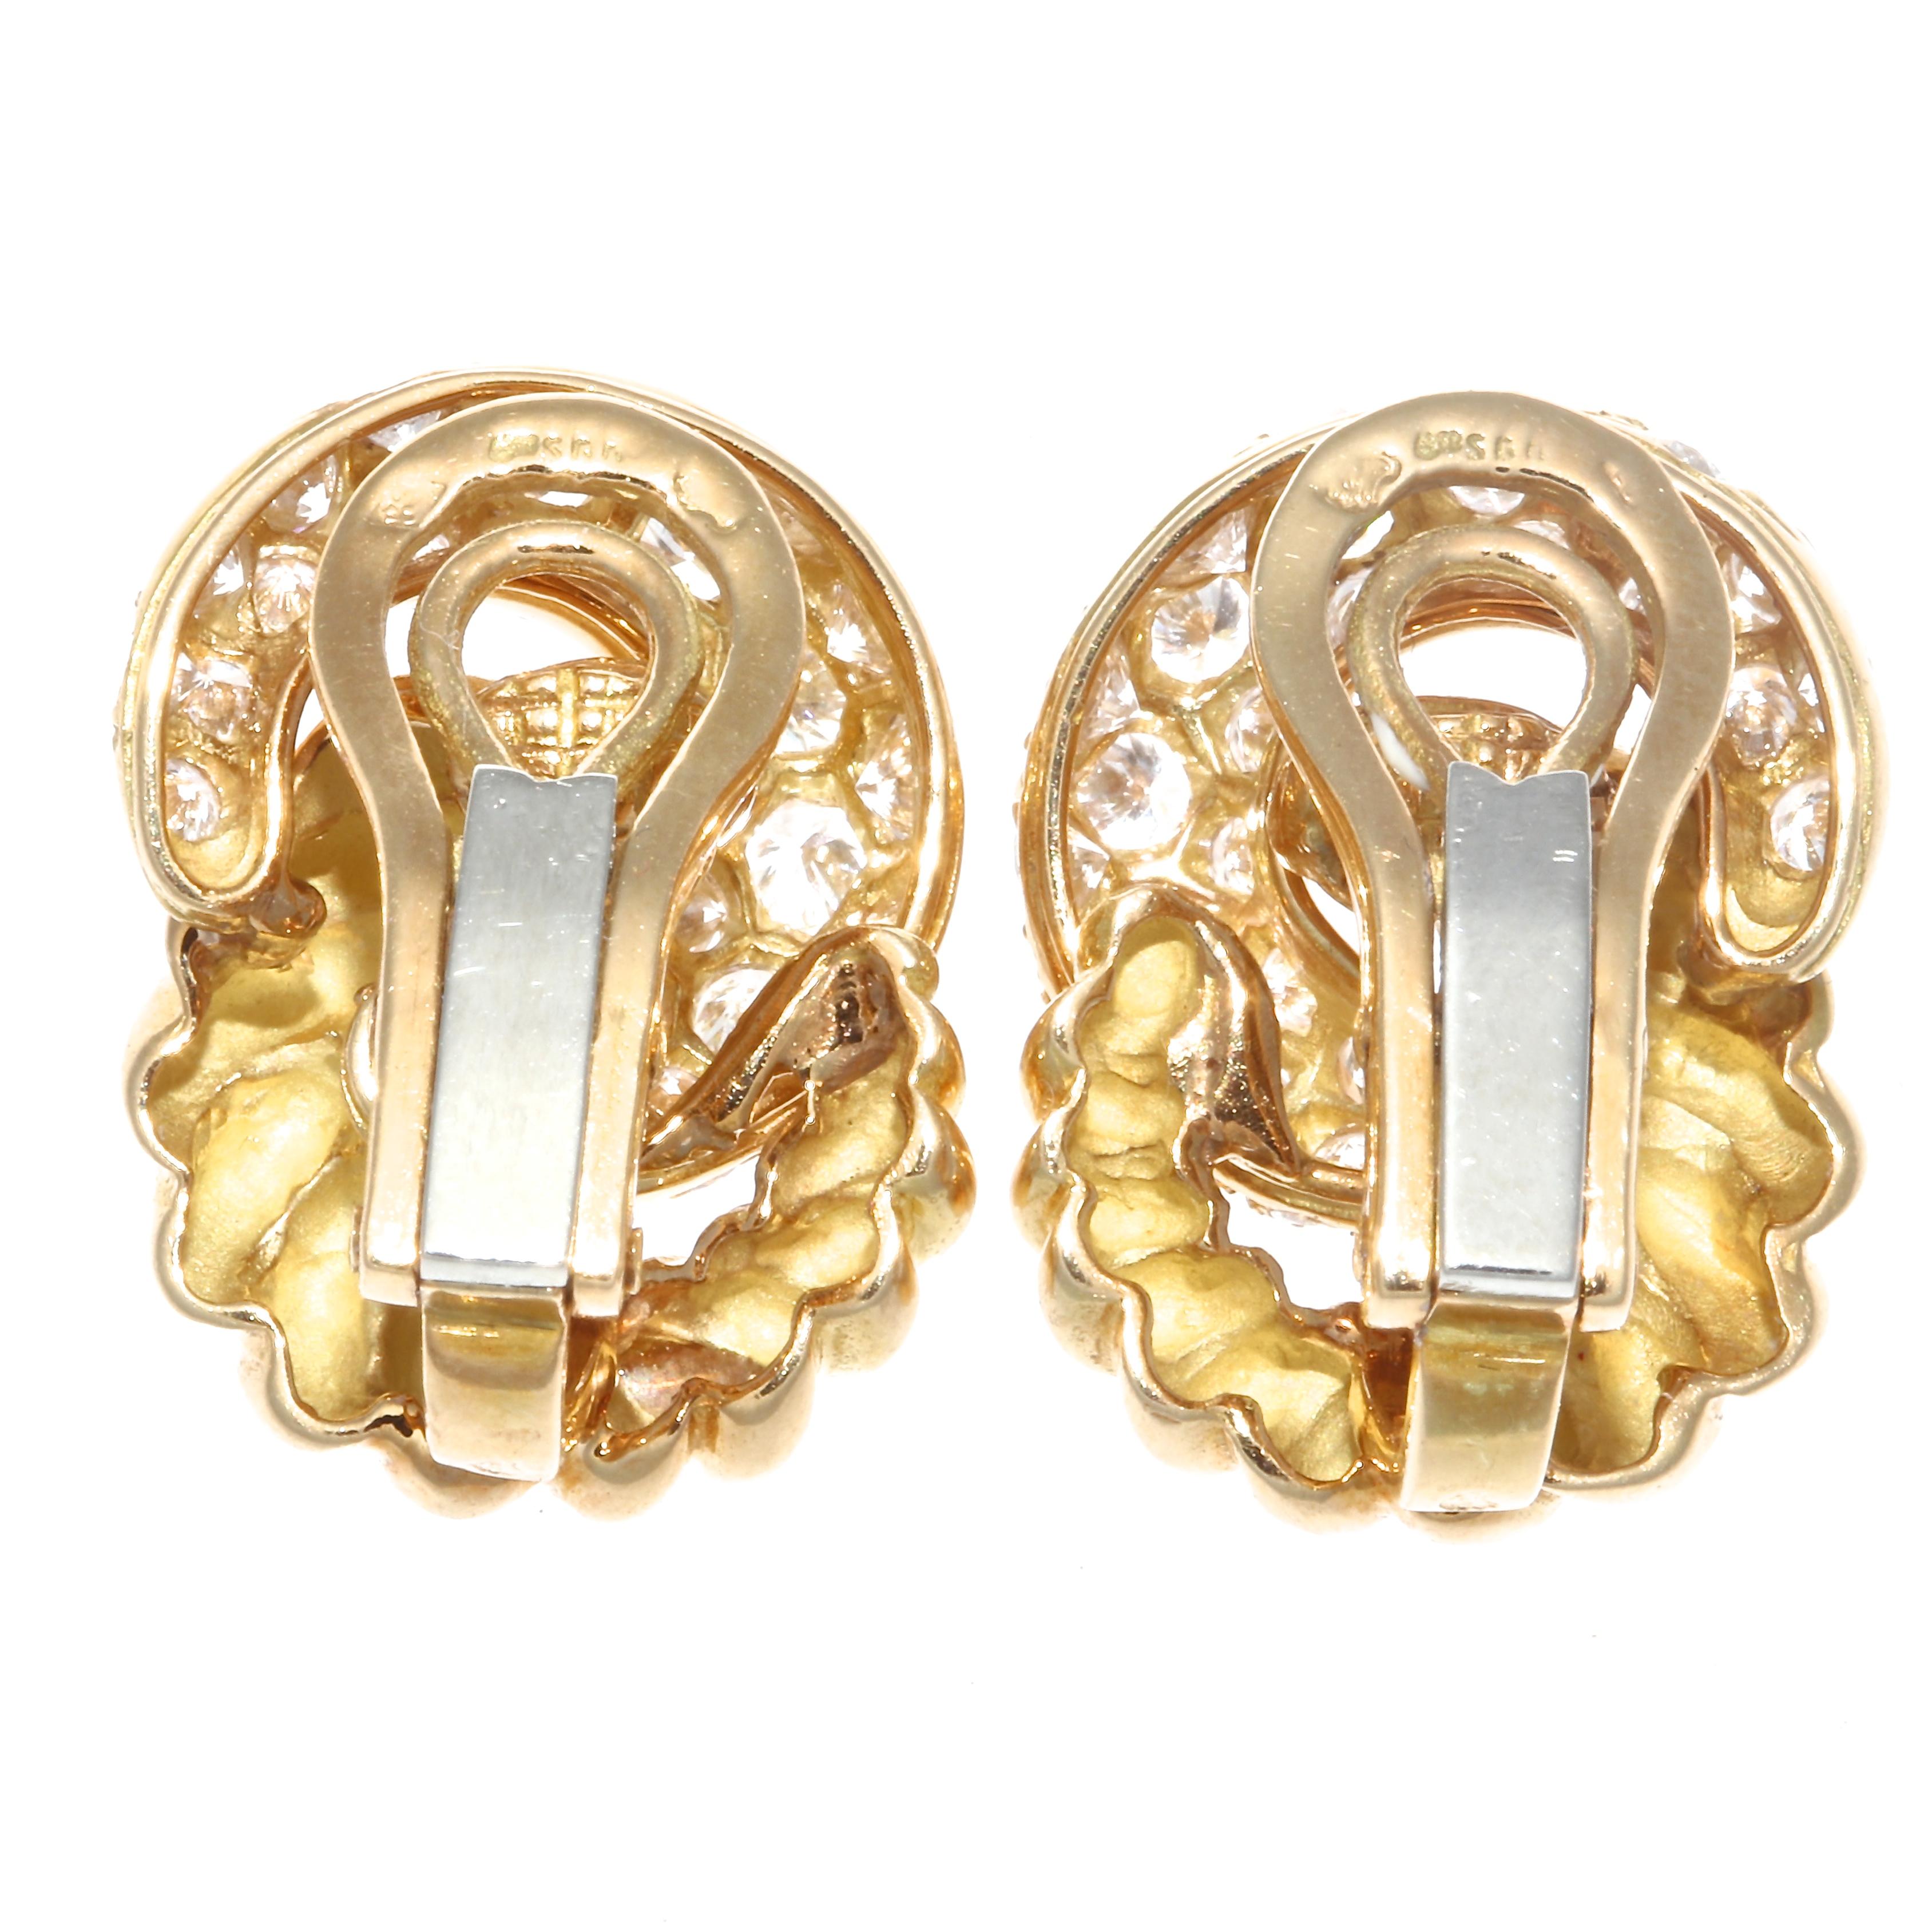 Elegant and classic double hoop earrings by Verdura featuring one twisted gold hoop and one diamond encrusted hoop. With 2.50 carats total weight in diamonds, graded D-E color, VS clarity. Stamped with French eagle head. Each earring is .5 inches